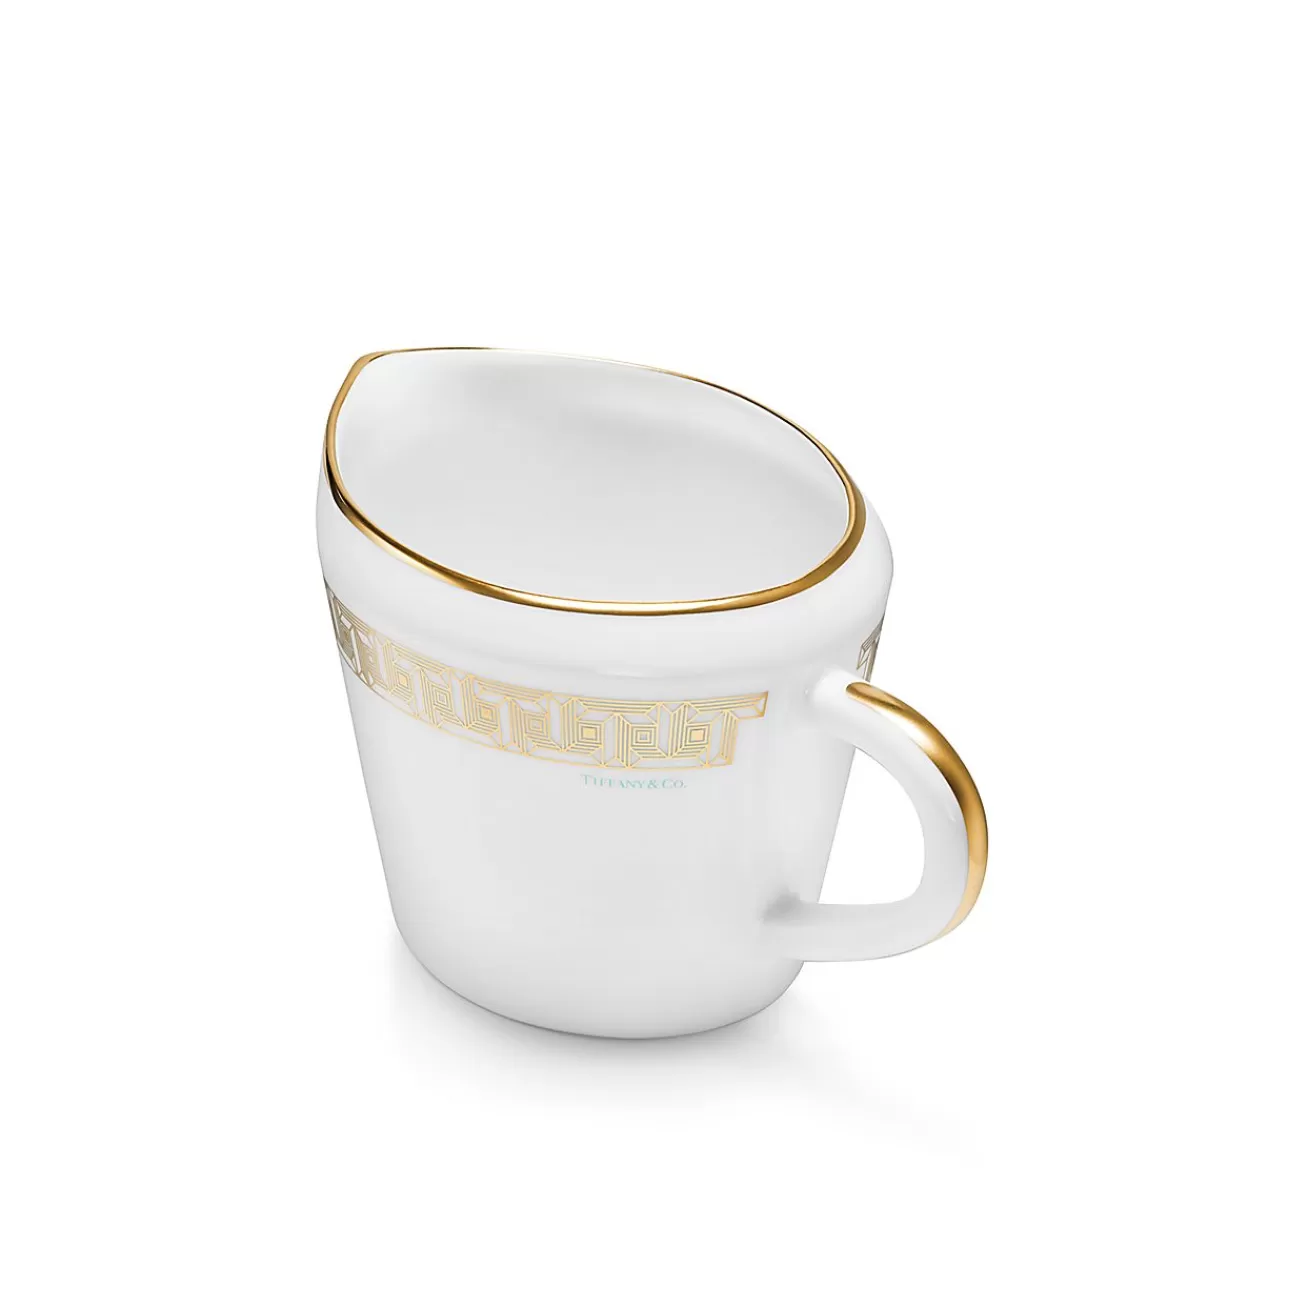 Tiffany & Co. Gold Tiffany T True Creamer with a Hand-painted Gold Rim | ^ Tableware | Coffee & Tea